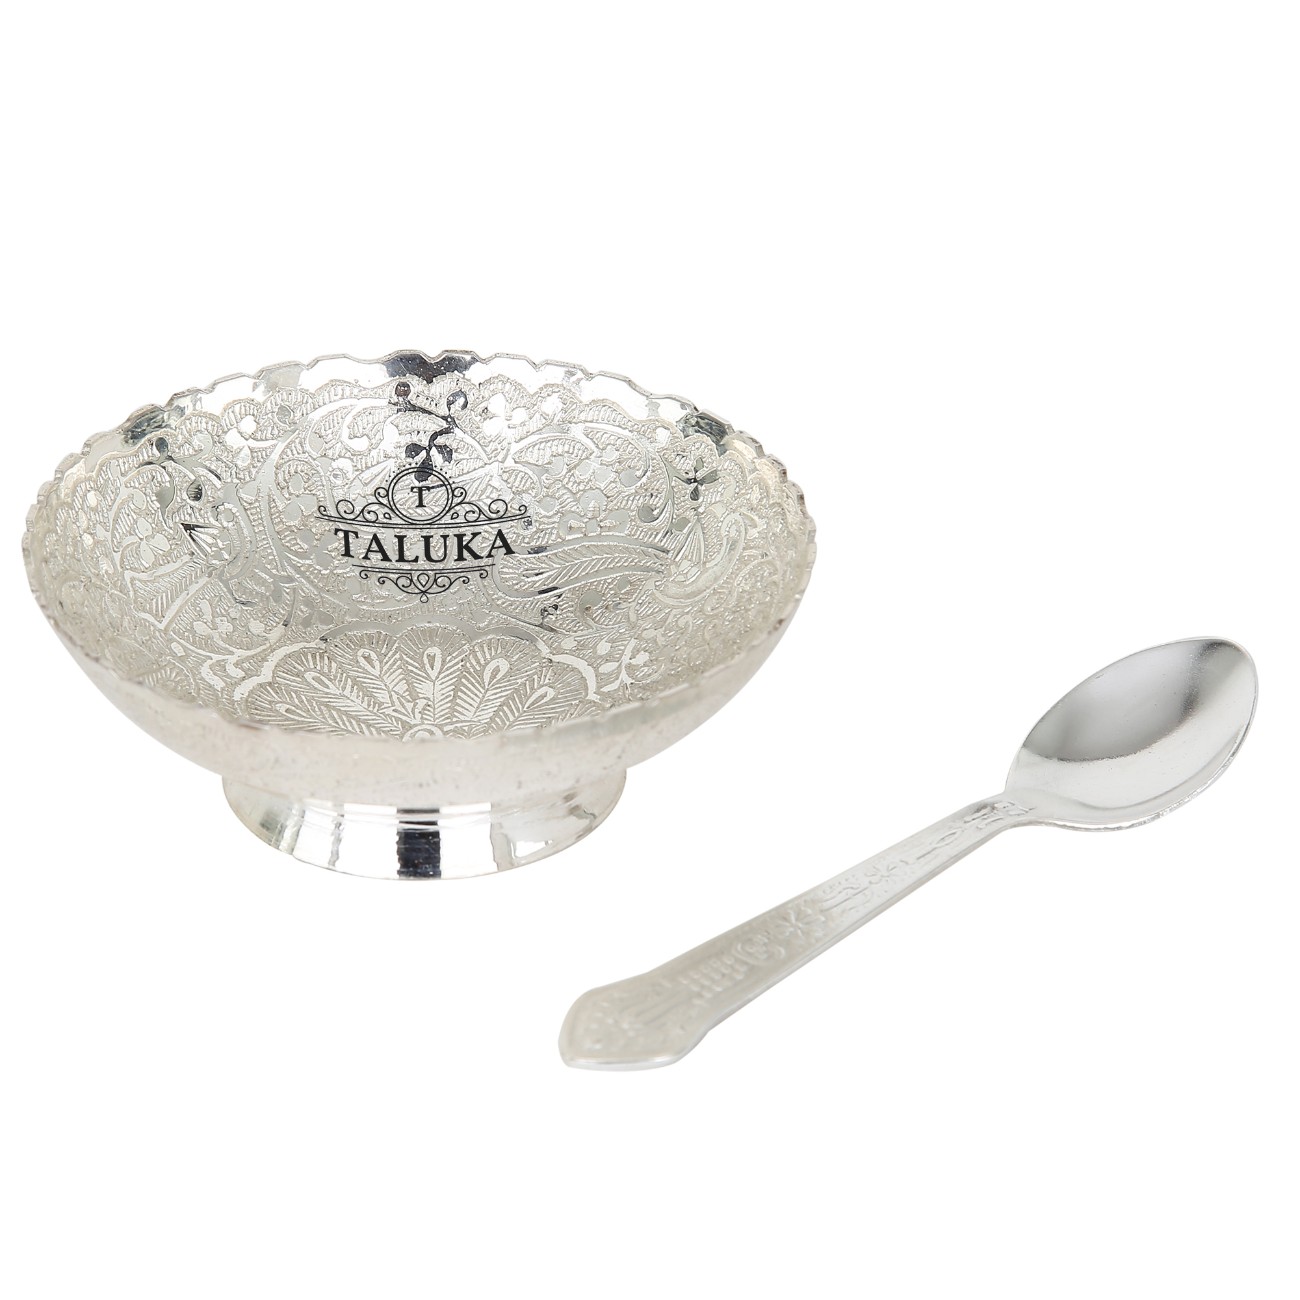 Silver Plated Desert Bowl, Spoon Set for Gifting, 4.5-inch Gift Box